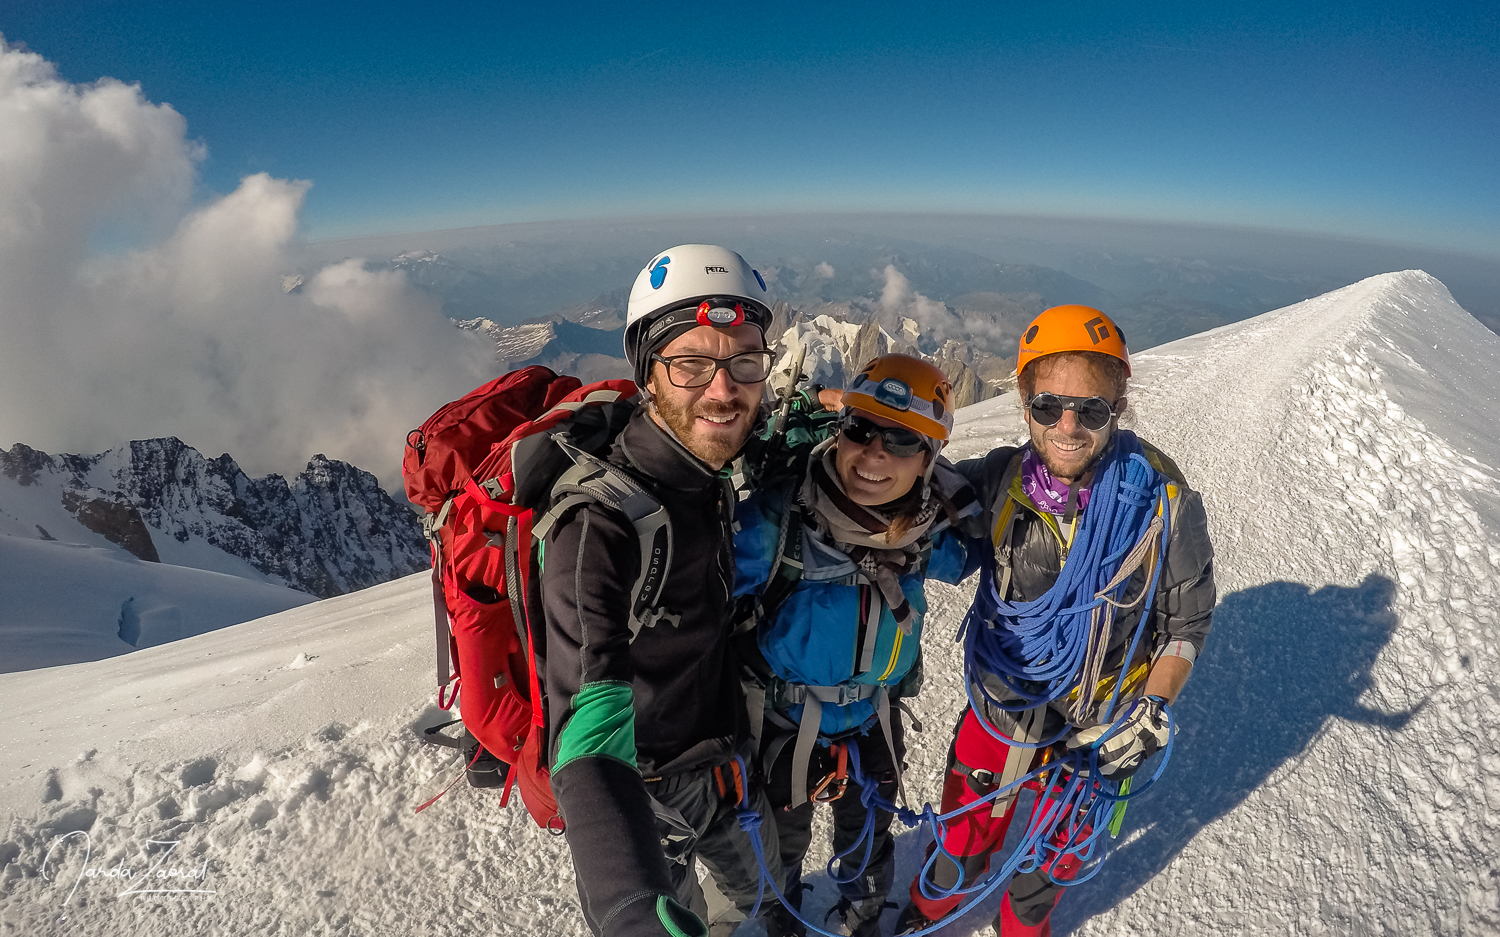 On top of Mont Blanc